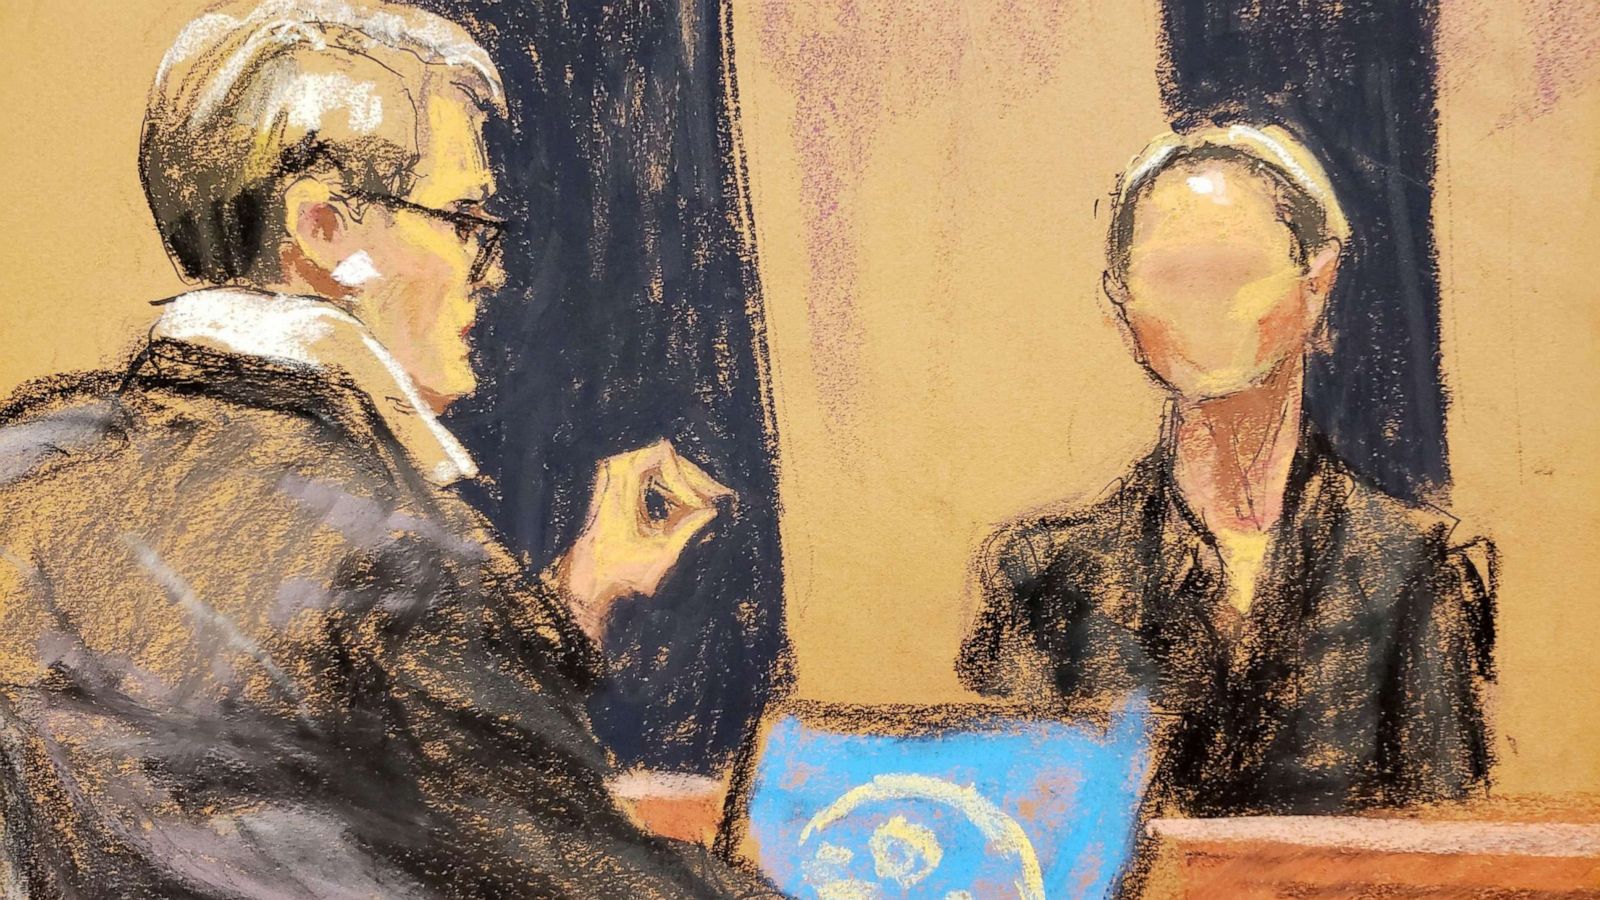 Government witness 'Kate' testifies Ghislaine Maxwell groomed her for sex  acts with Jeffrey Epstein - ABC News